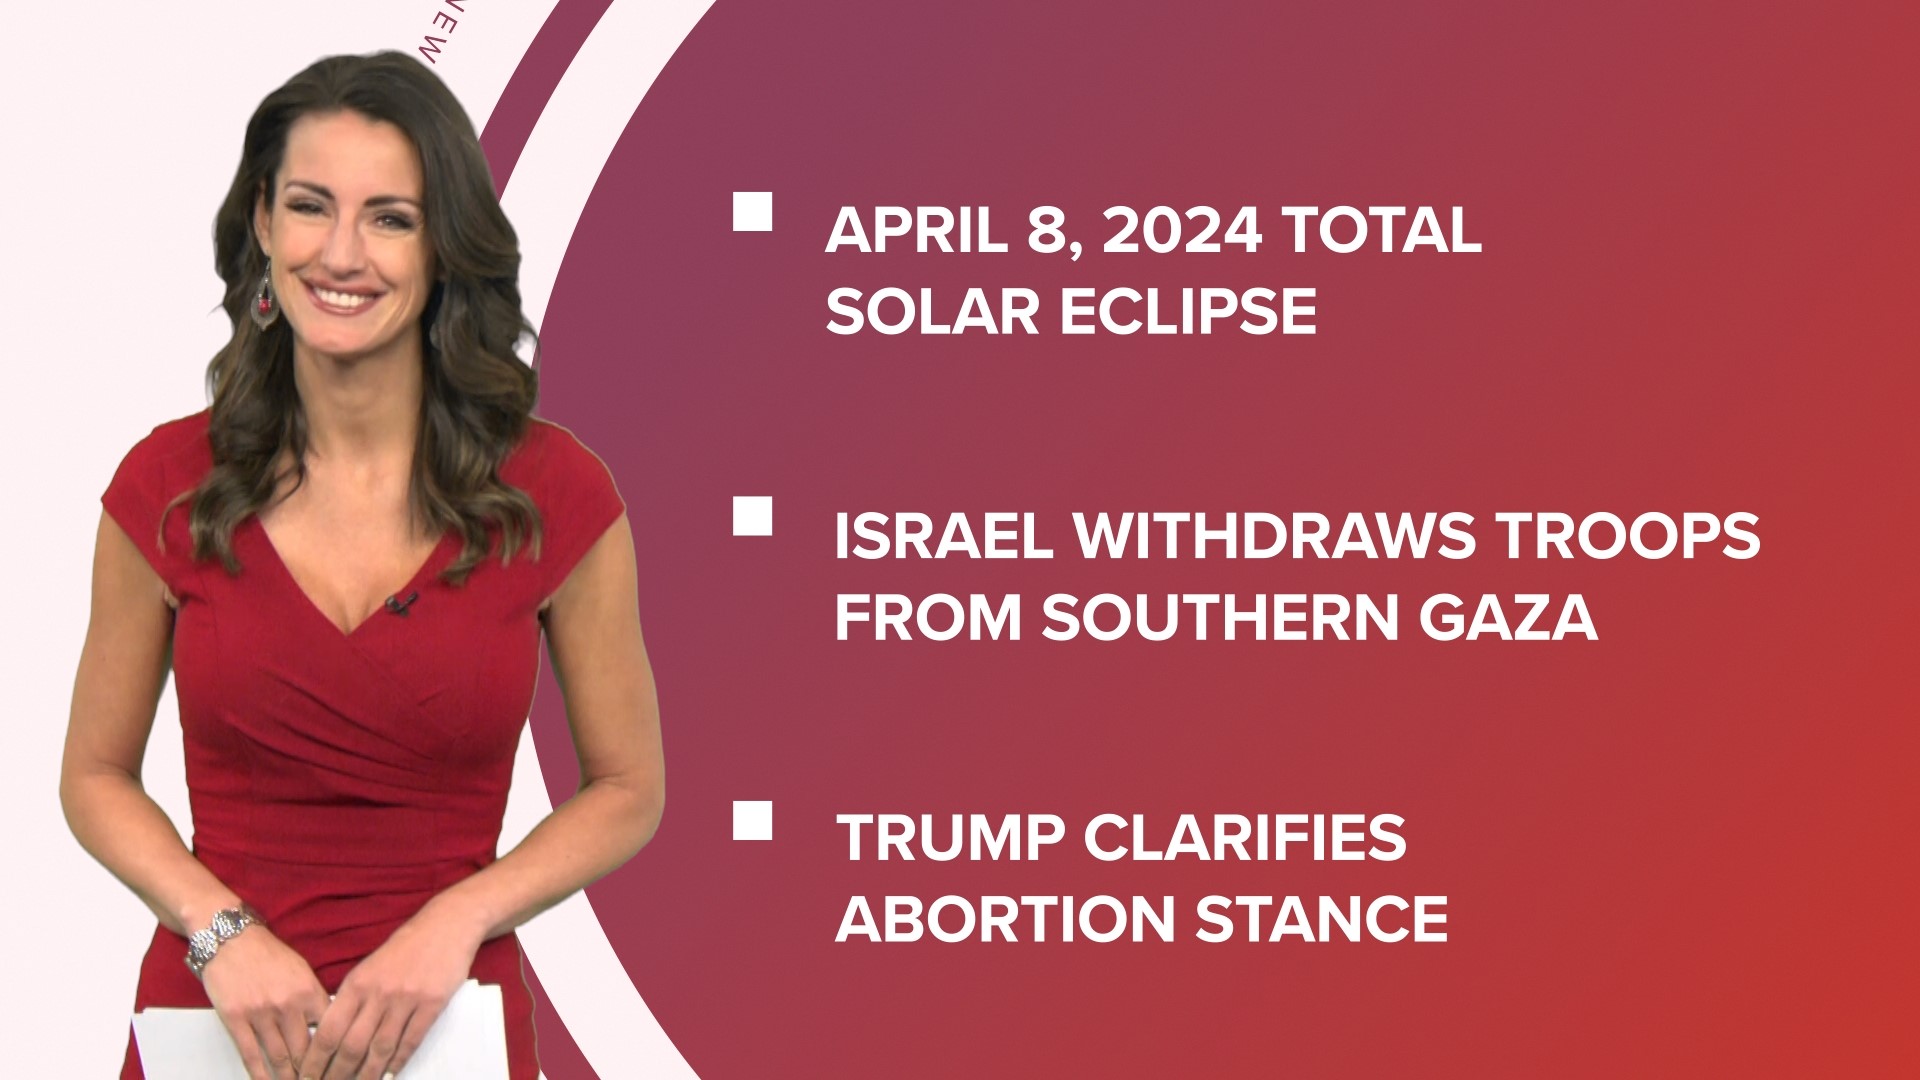 A look at what is happening in the news from the total solar eclipse in the U.S. to Trump clarifies his stance on abortion and UConn wins March Madness.